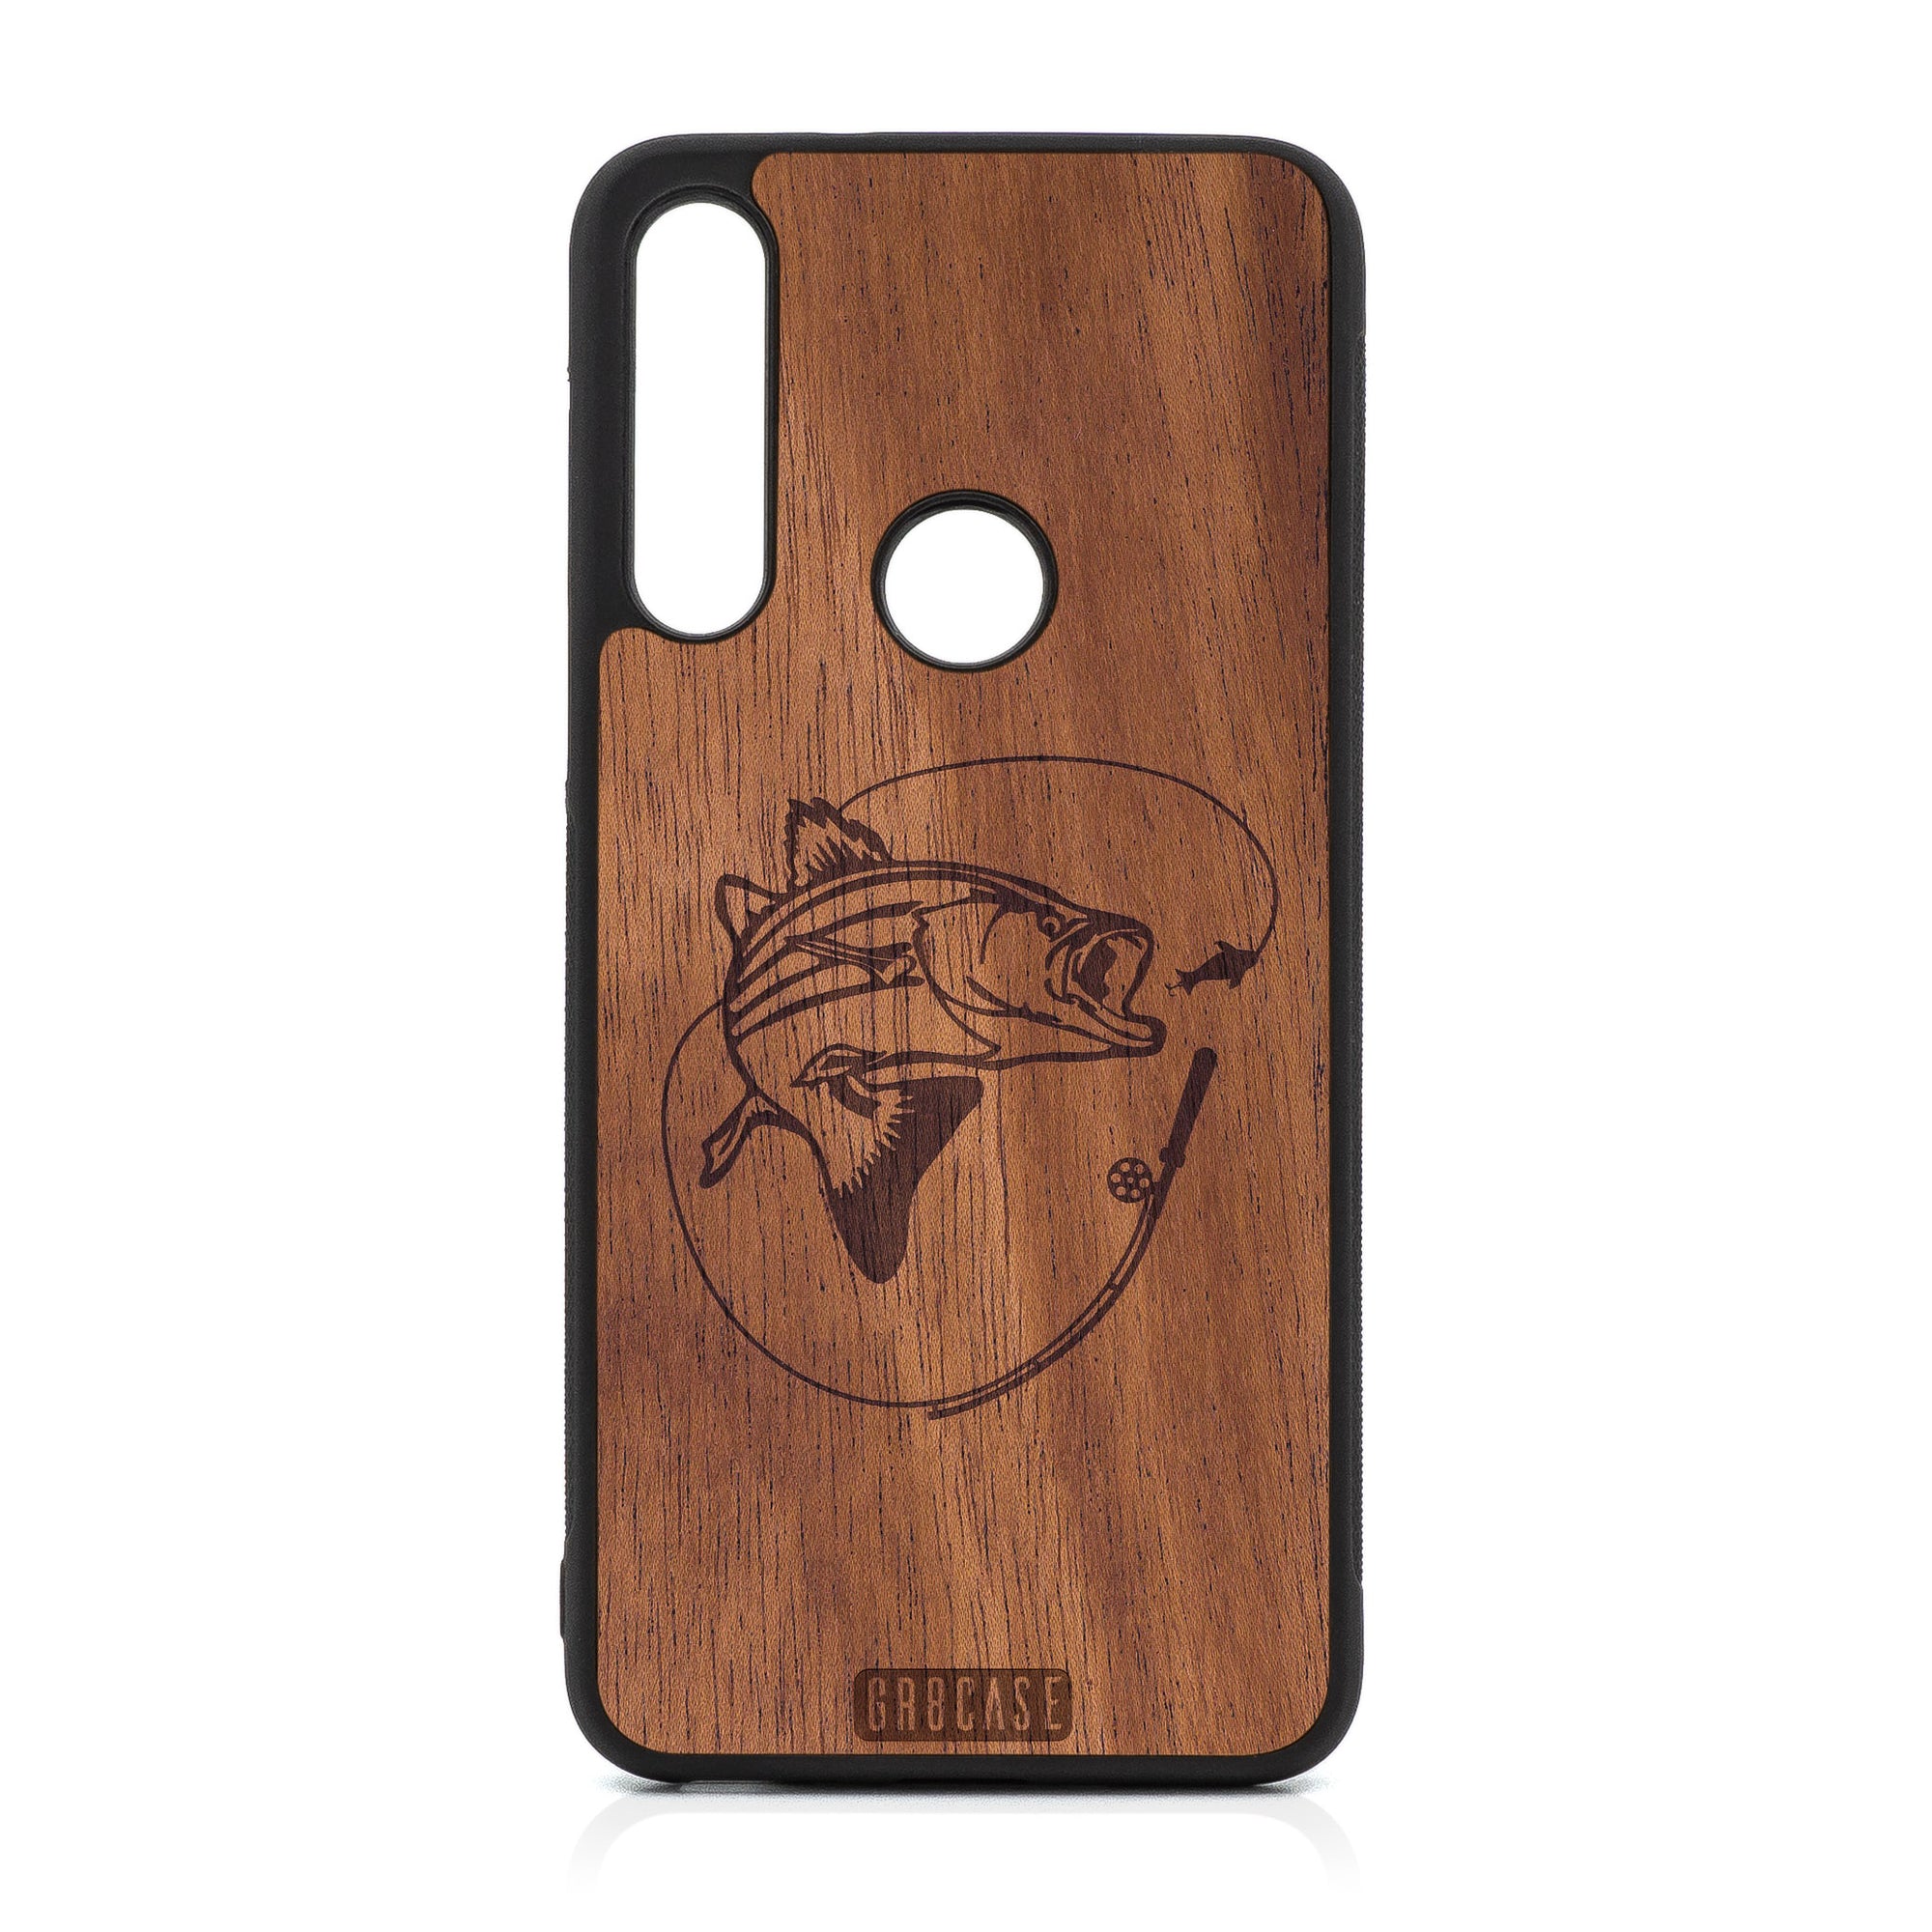 Fish and Reel Design Wood Case For Moto G Fast